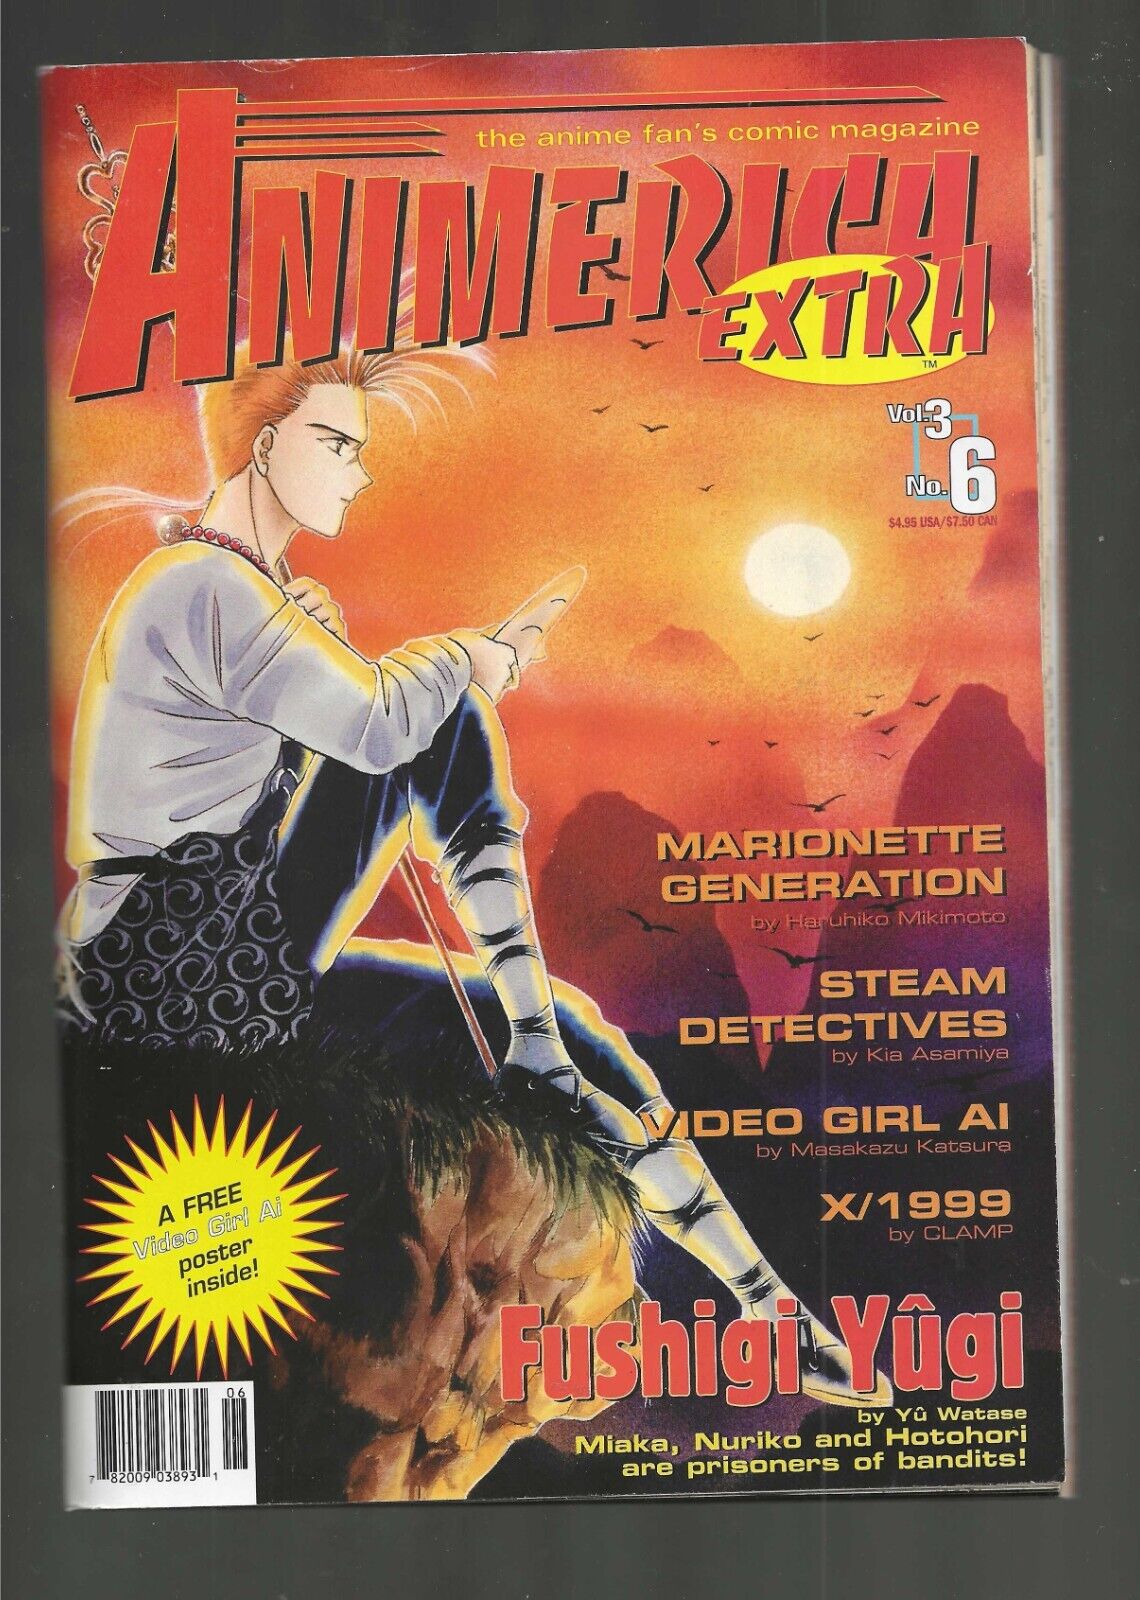 2000 Animerica Extr-Vol  3 #6- Free nside-Video Girl Ai Poster -B & White Pages-